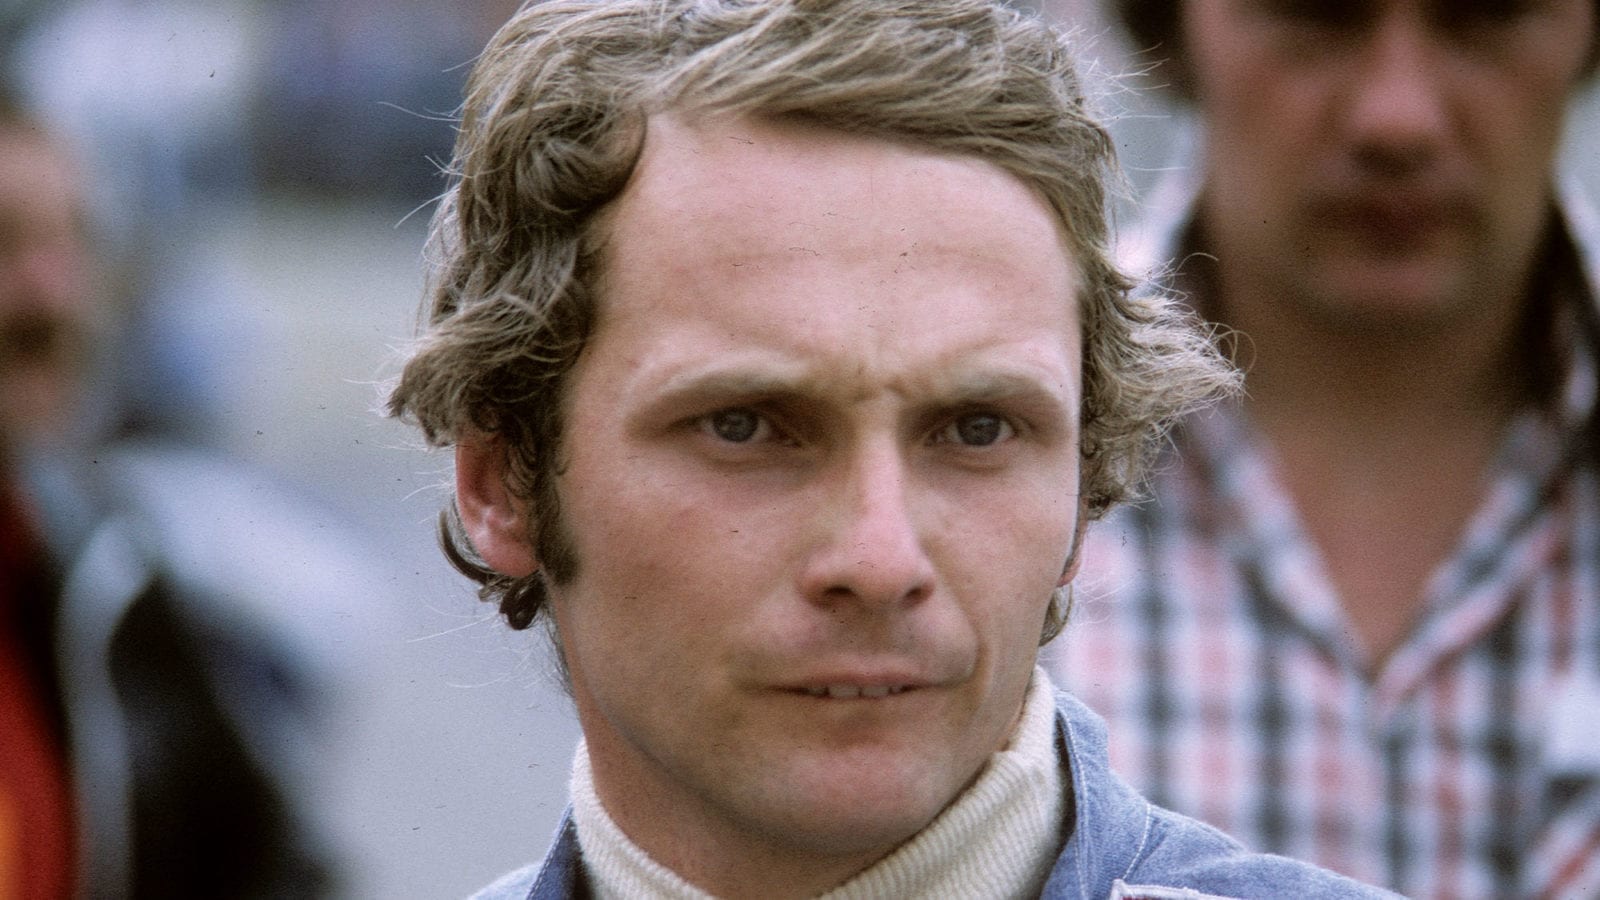 BRANDS HATCH, ENGLAND - JULY 01: Austrian F1 racing driver Niki Lauda at Brands Hatch on July 01, 1974 in Brands Hatch England. (Photo by Anwar Hussein/Getty Images)